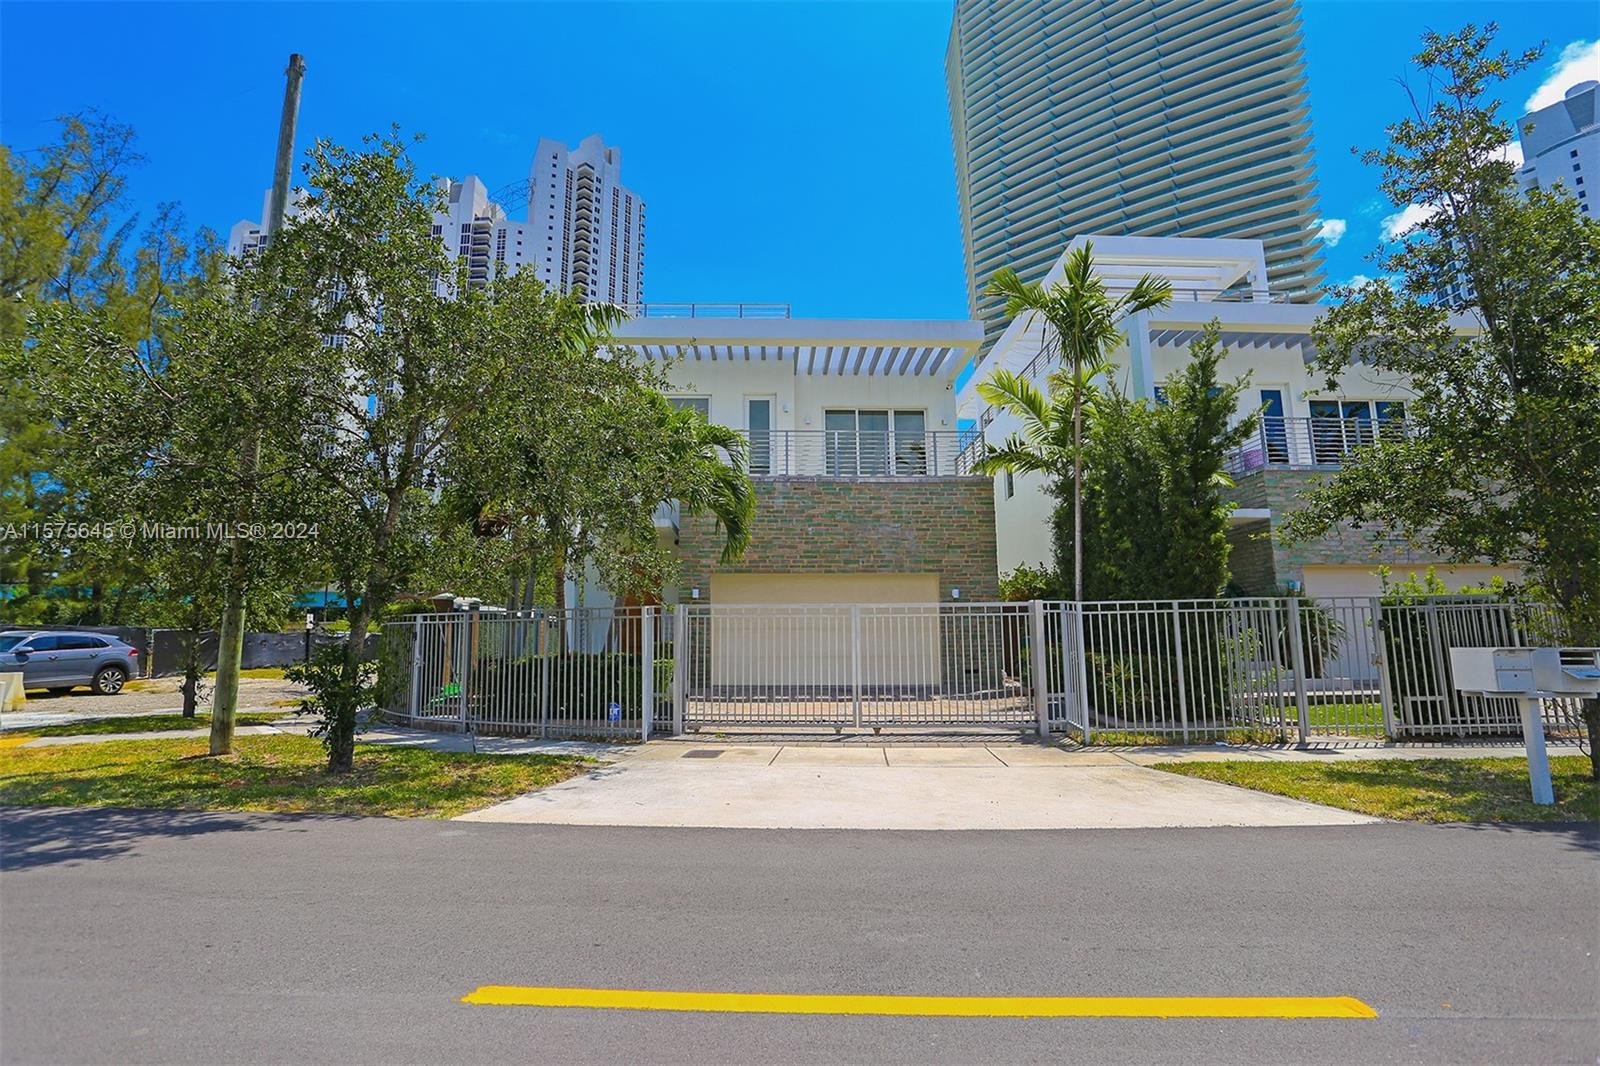 Address Not Disclosed, Sunny Isles Beach, Miami-Dade County, Florida - 5 Bedrooms  
5 Bathrooms - 